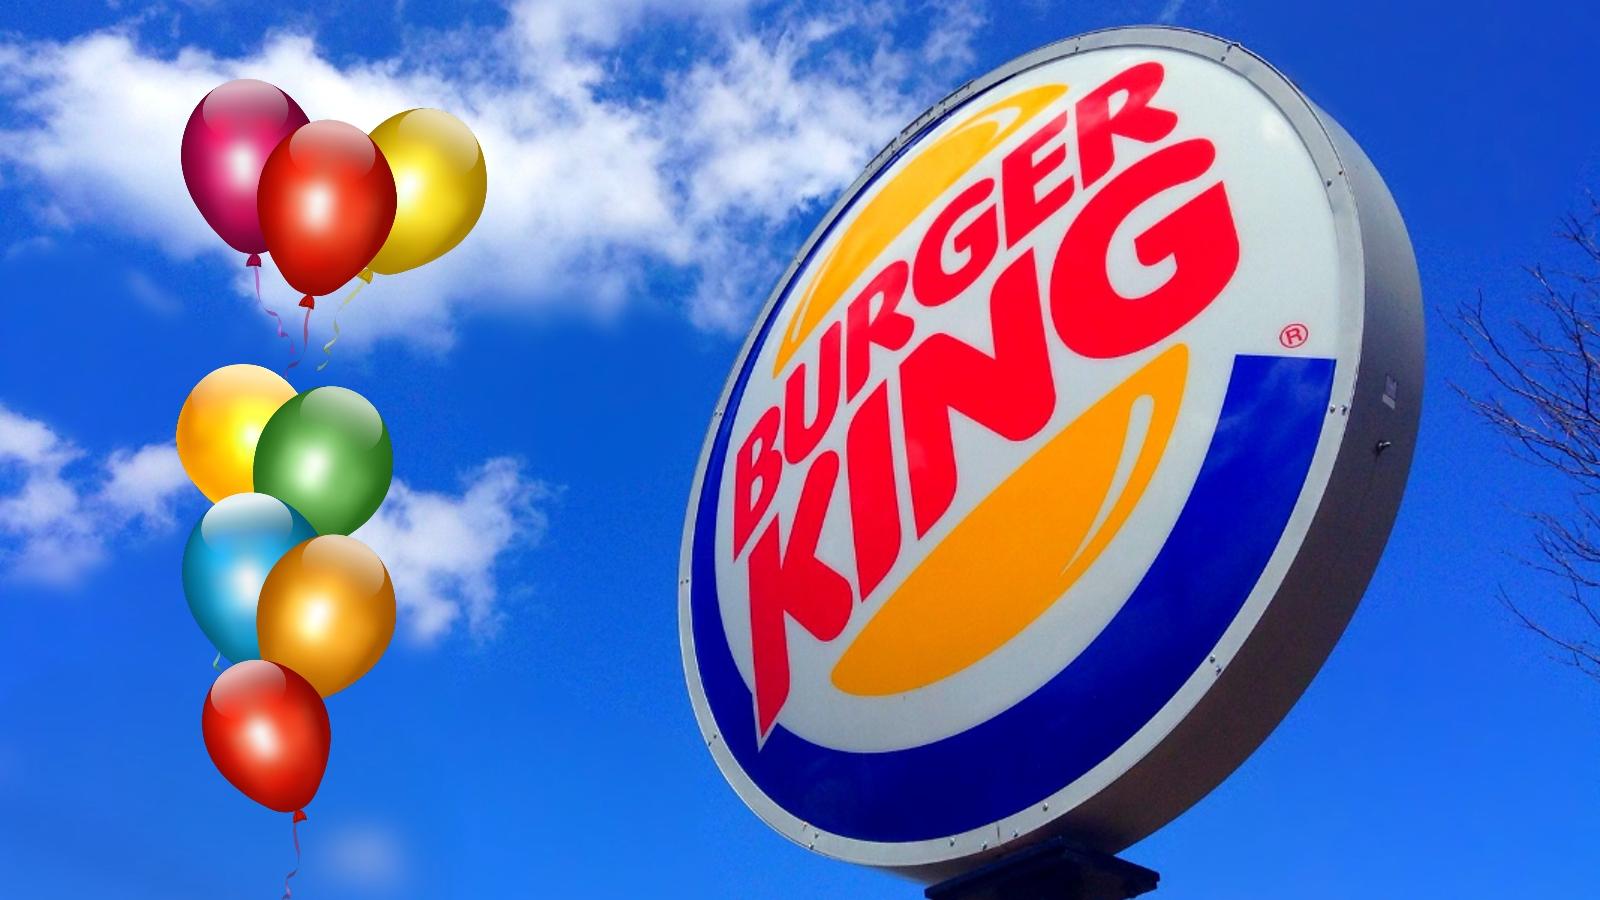 Burger King sign with birthday balloons